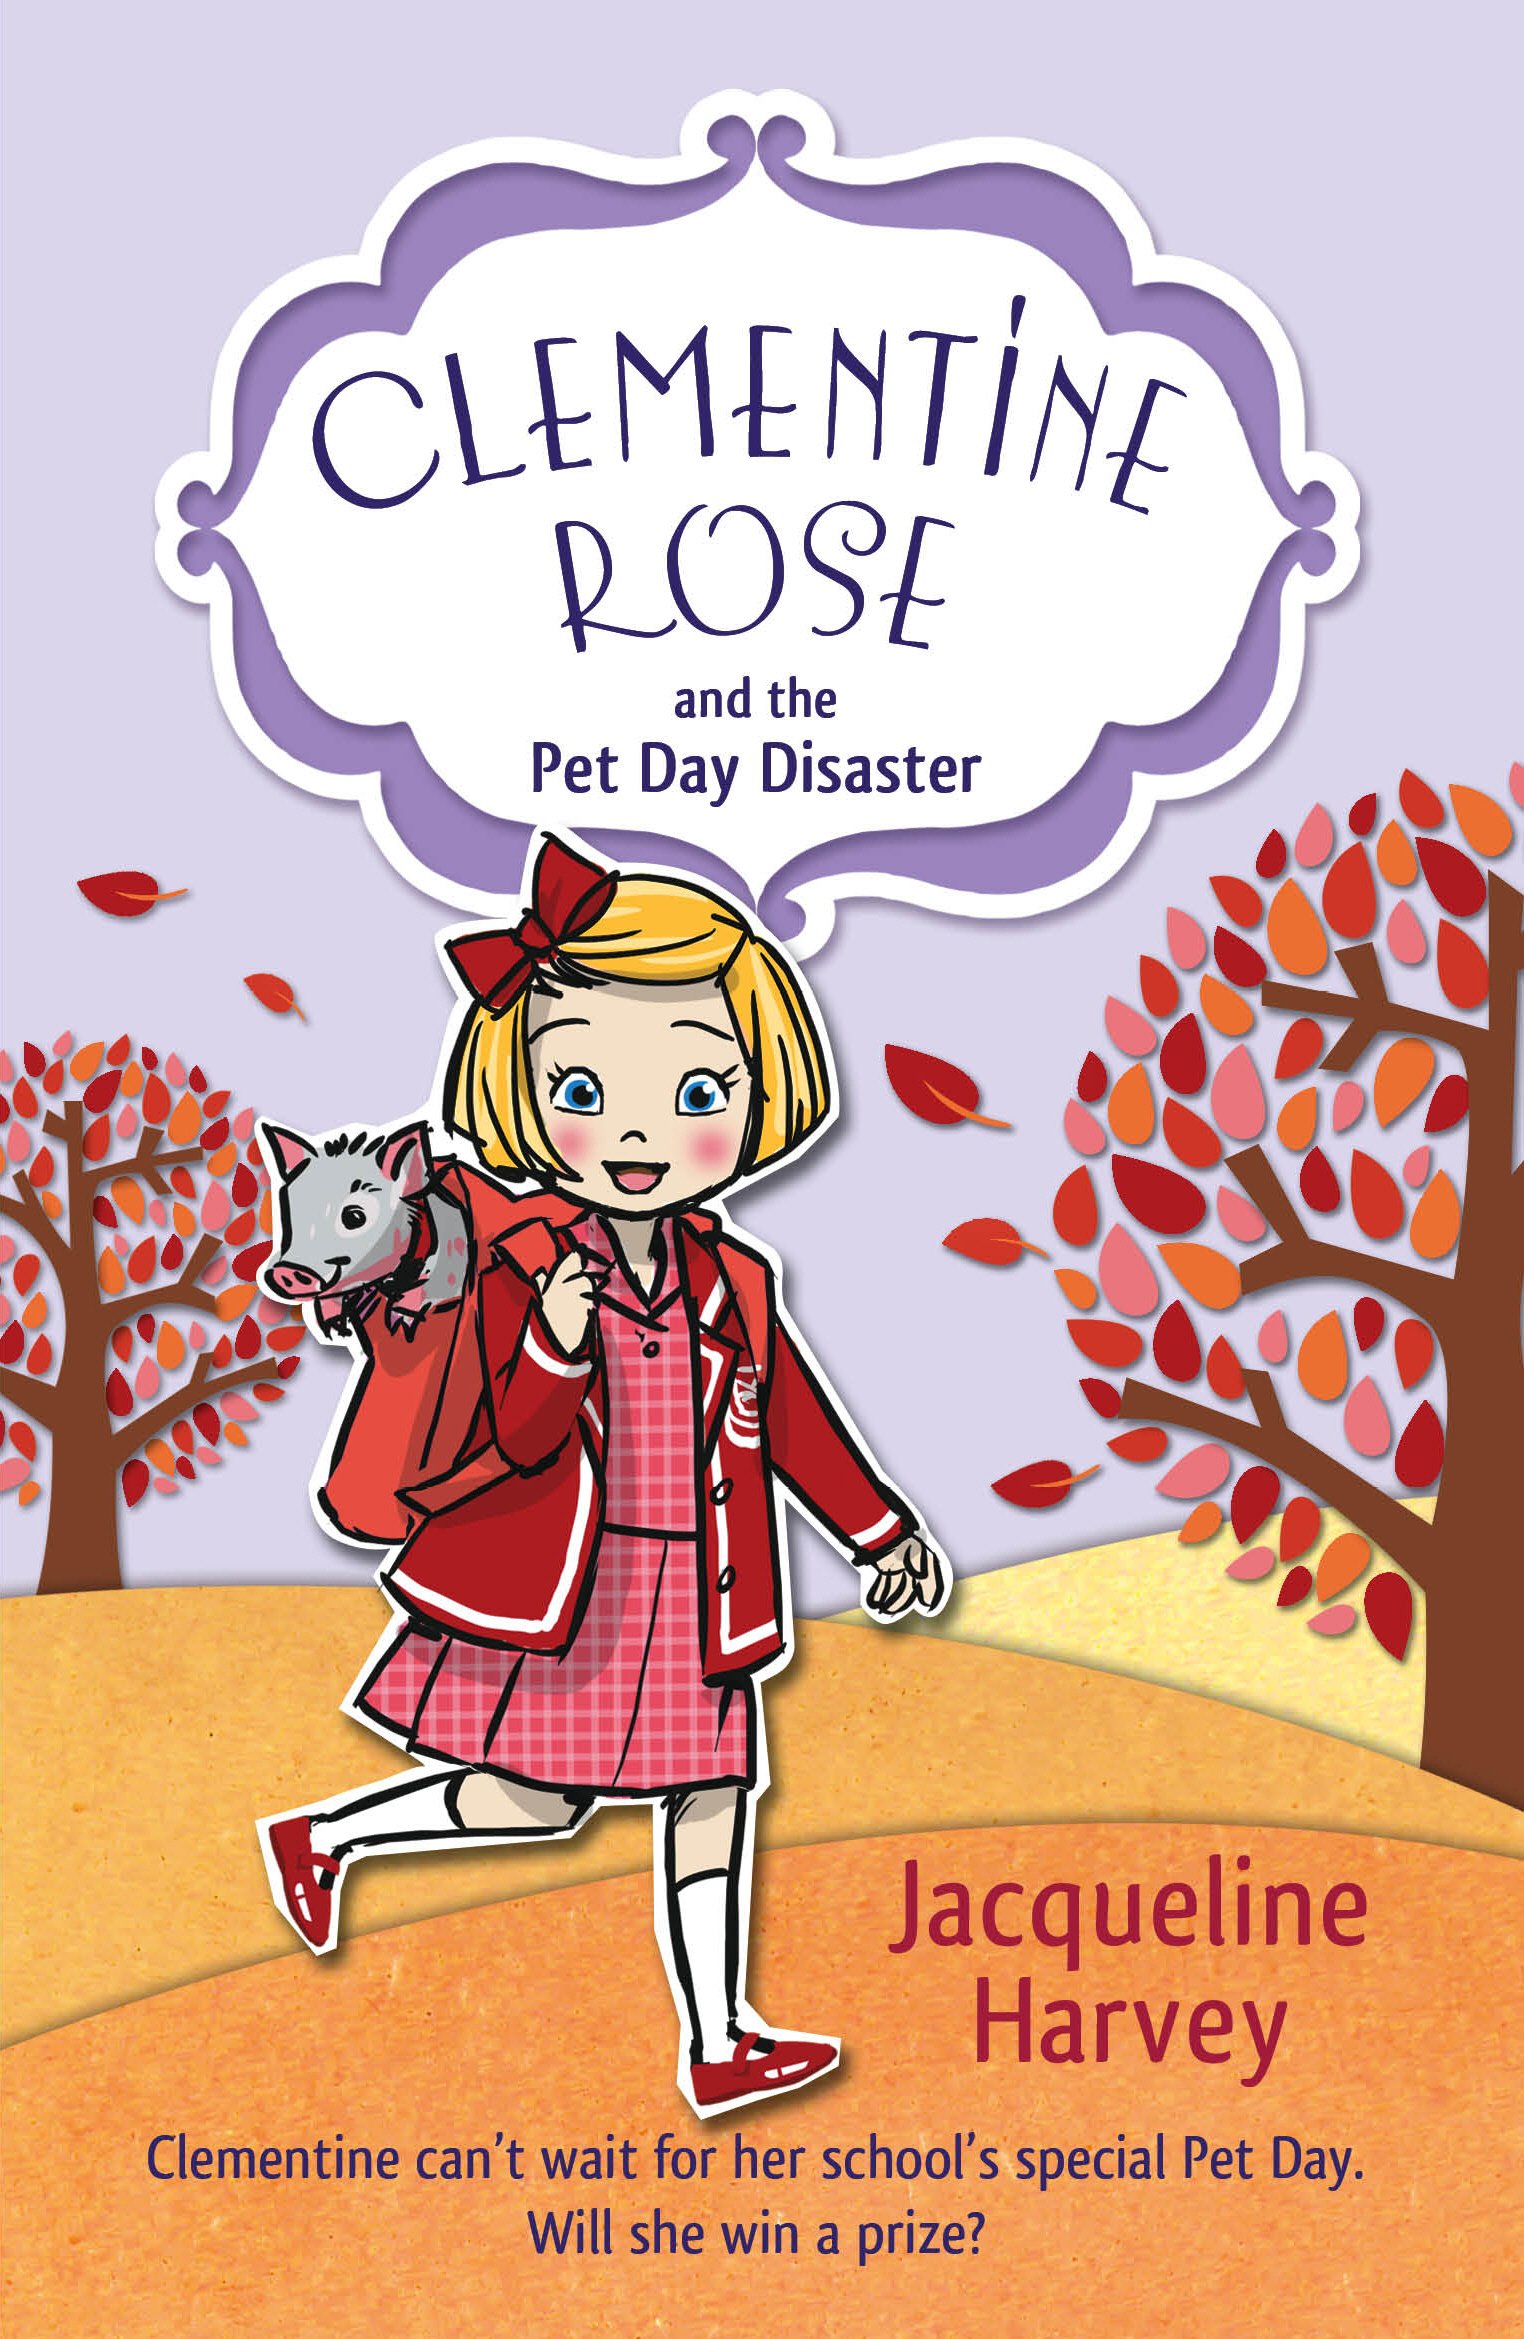 Clementine Rose and the Pet Day Disaster - Jacqueline Harvey